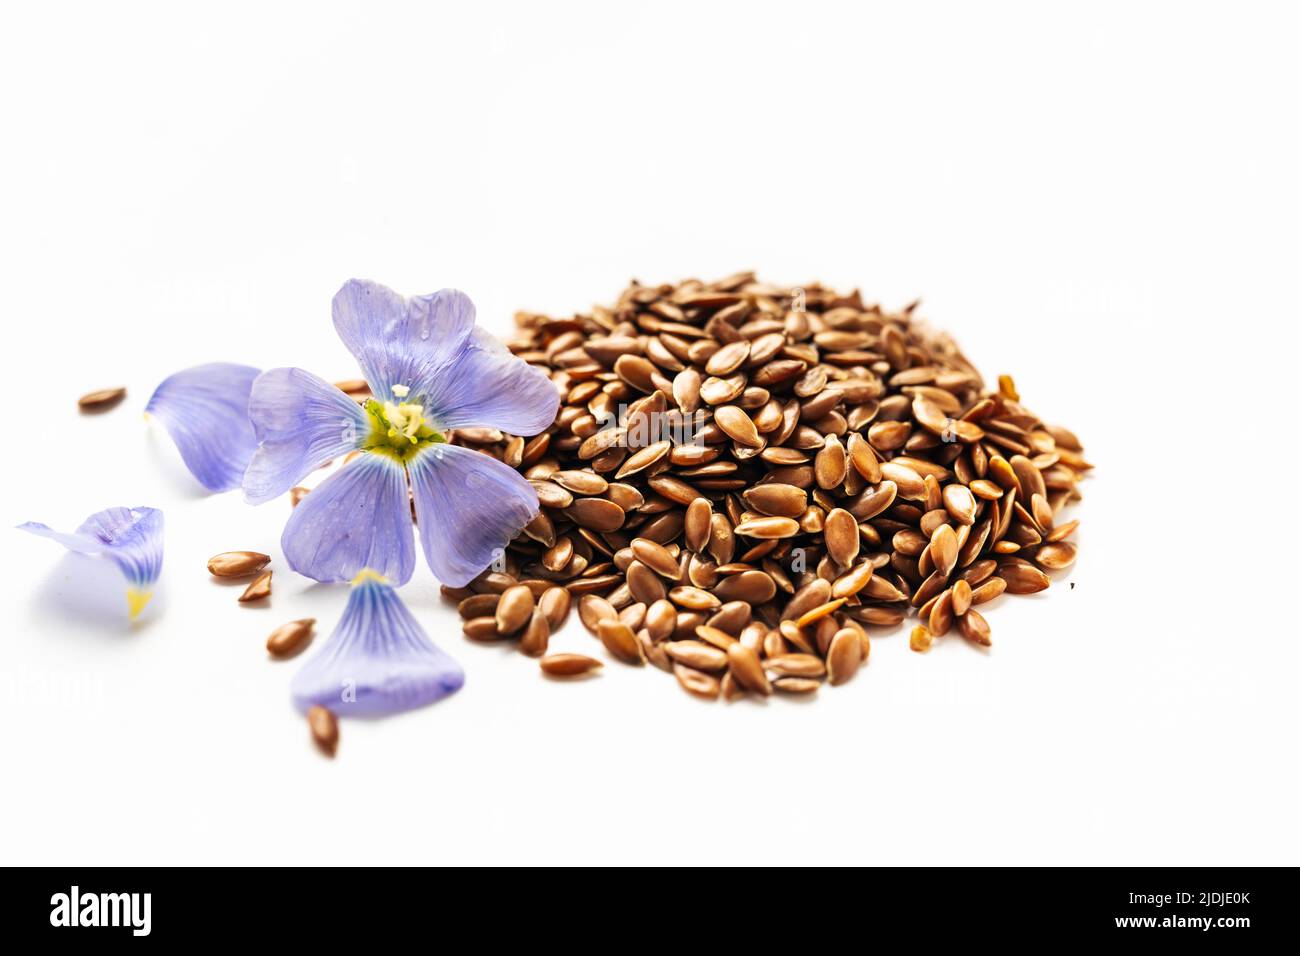 Flax seed and flax flowers macro on white backgrounds. Omega 3 fats. Superfood concept Stock Photo